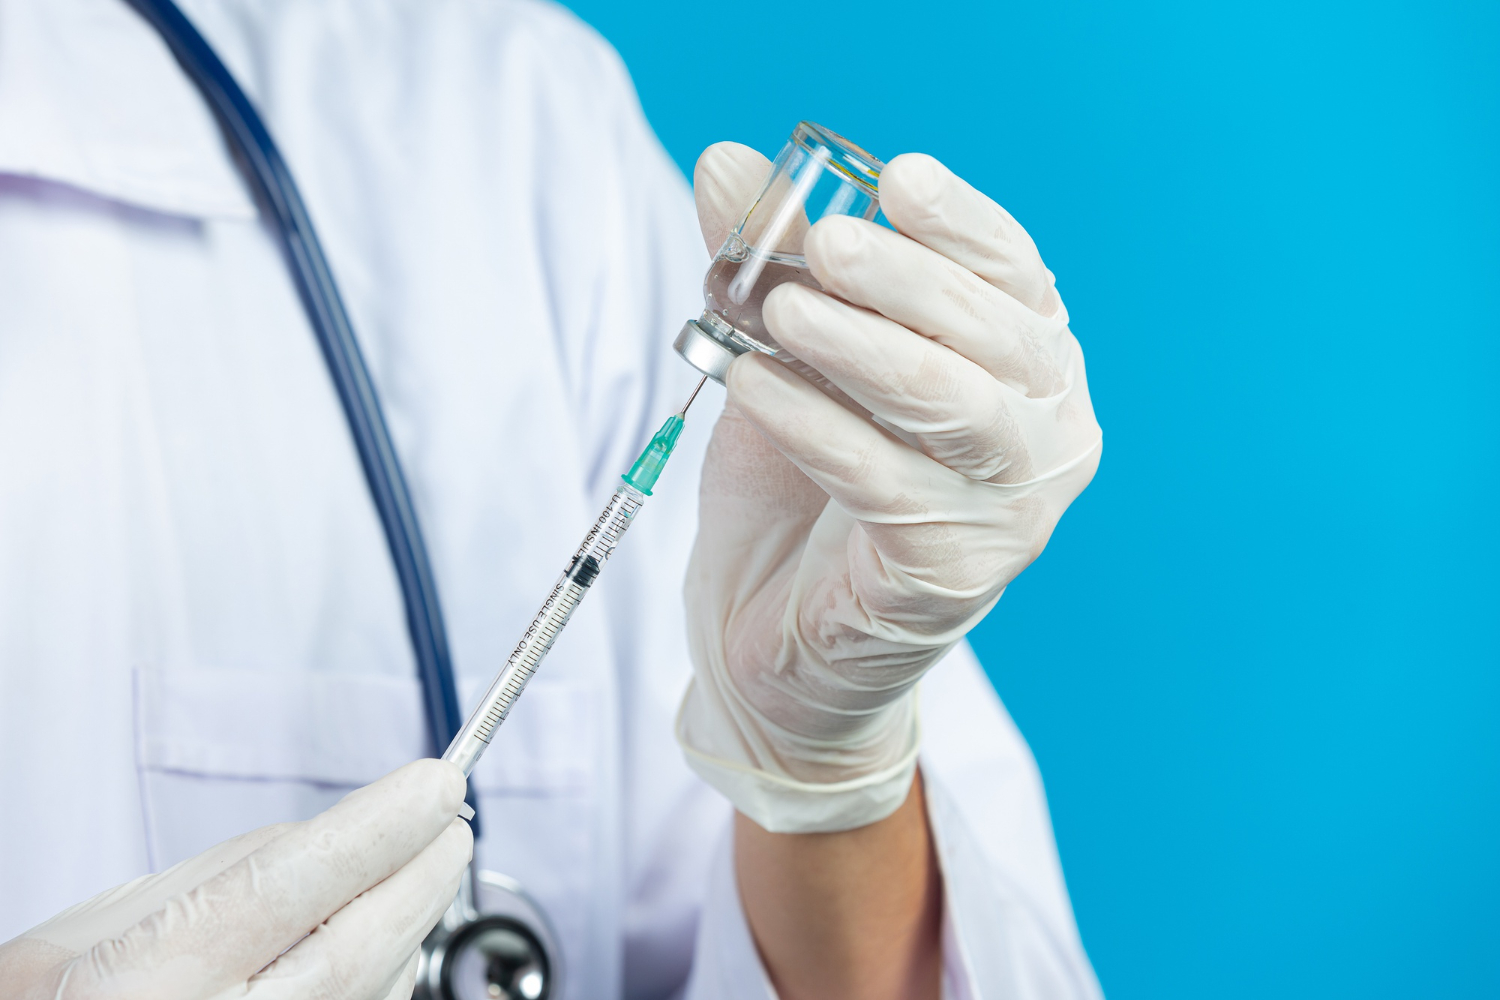 close-up-picture-docter-s-hands-holding-hypodermic-syringe